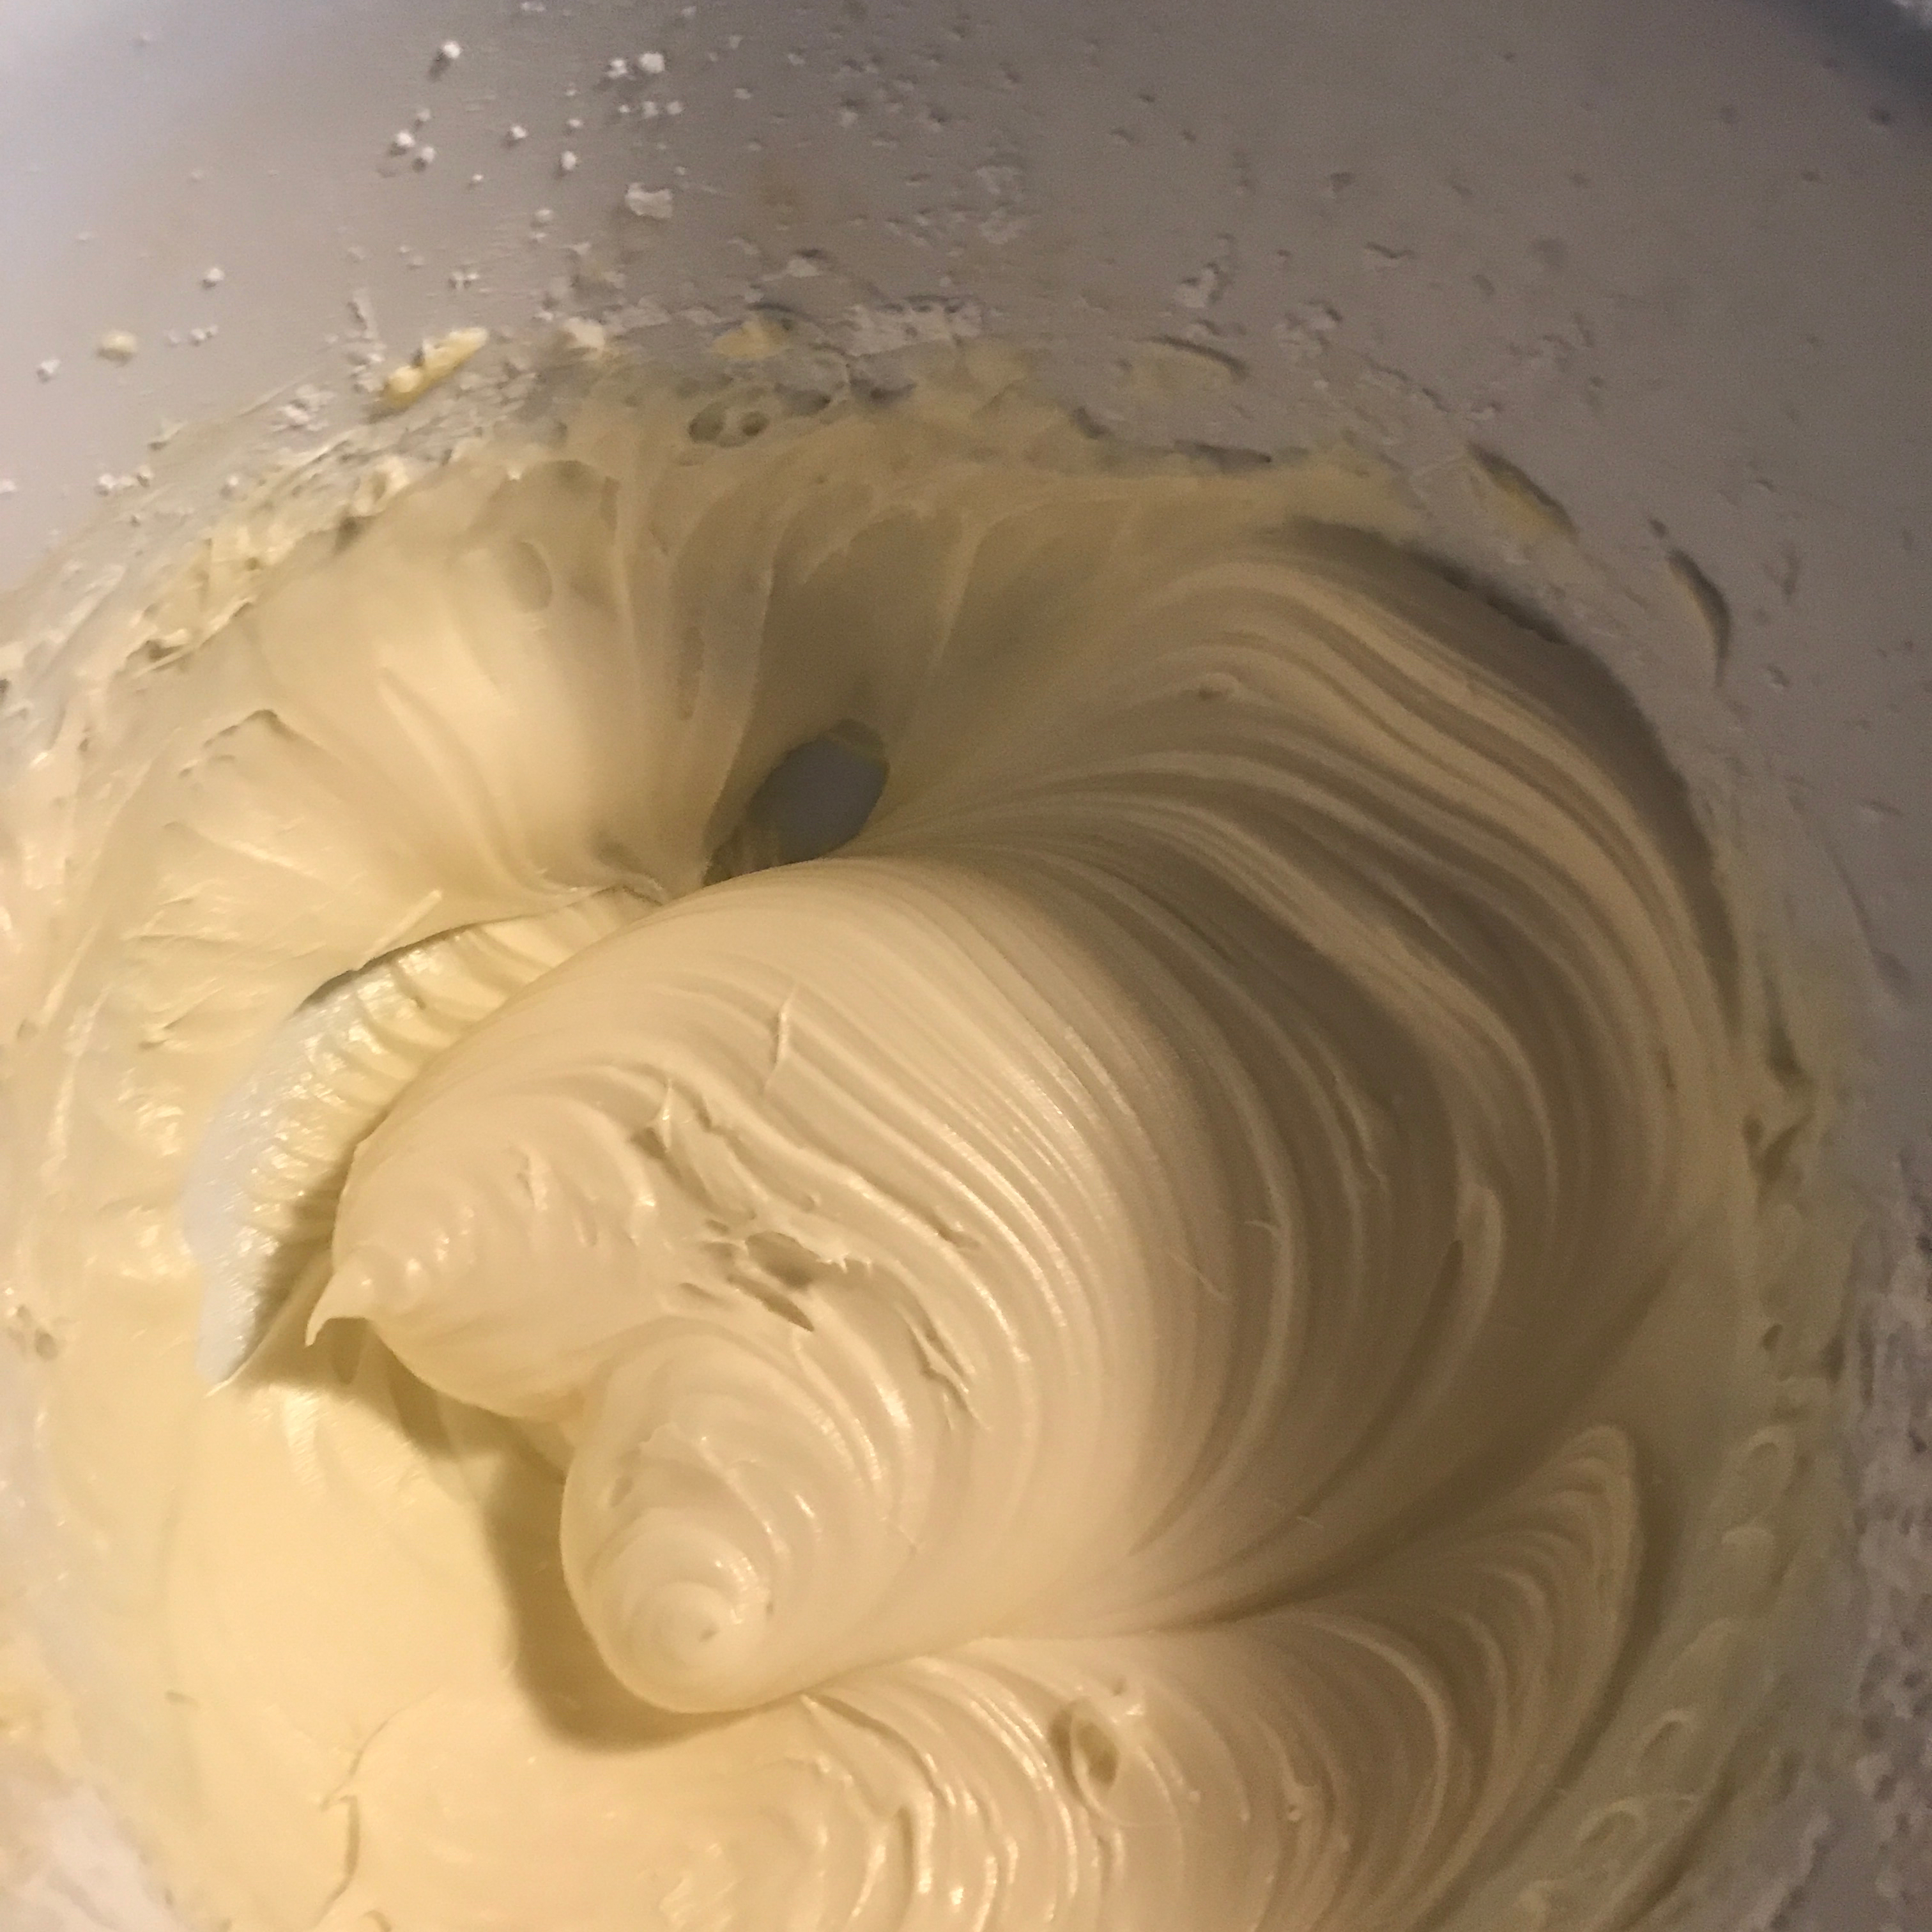 The Perfect Cinnamon Roll Icing 